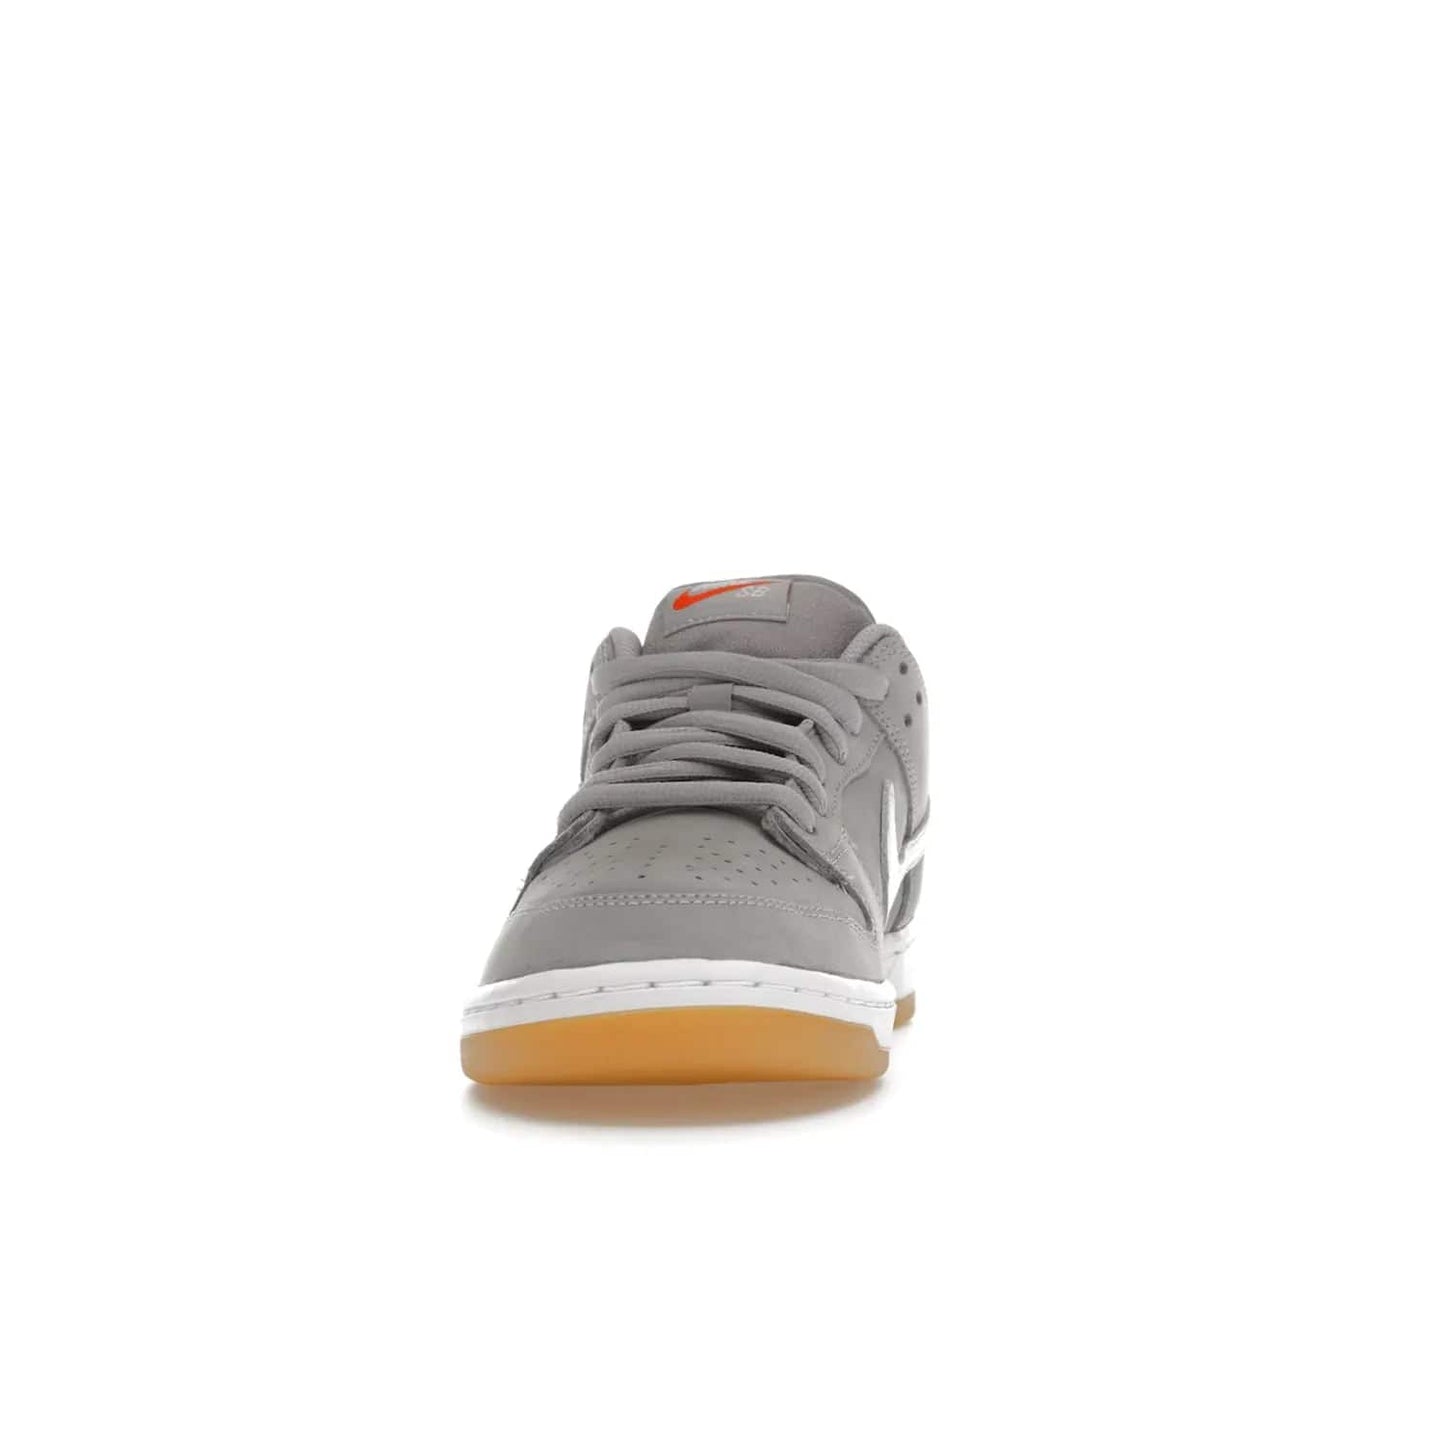 Nike SB Dunk Low Pro ISO Orange Label Wolf Grey Gum - Image 11 - Only at www.BallersClubKickz.com - Introducing Nike's SB Dunk Low Pro ISO Orange Label Wolf Grey Gum - a stylish shoe with a premium Wolf Grey upper, white leather Nike Swoosh, and an eye-catching gum outsole. With special Nike branding and packaging, this shoe adds a unique fashion statement. Out Feb. 24, 2023.